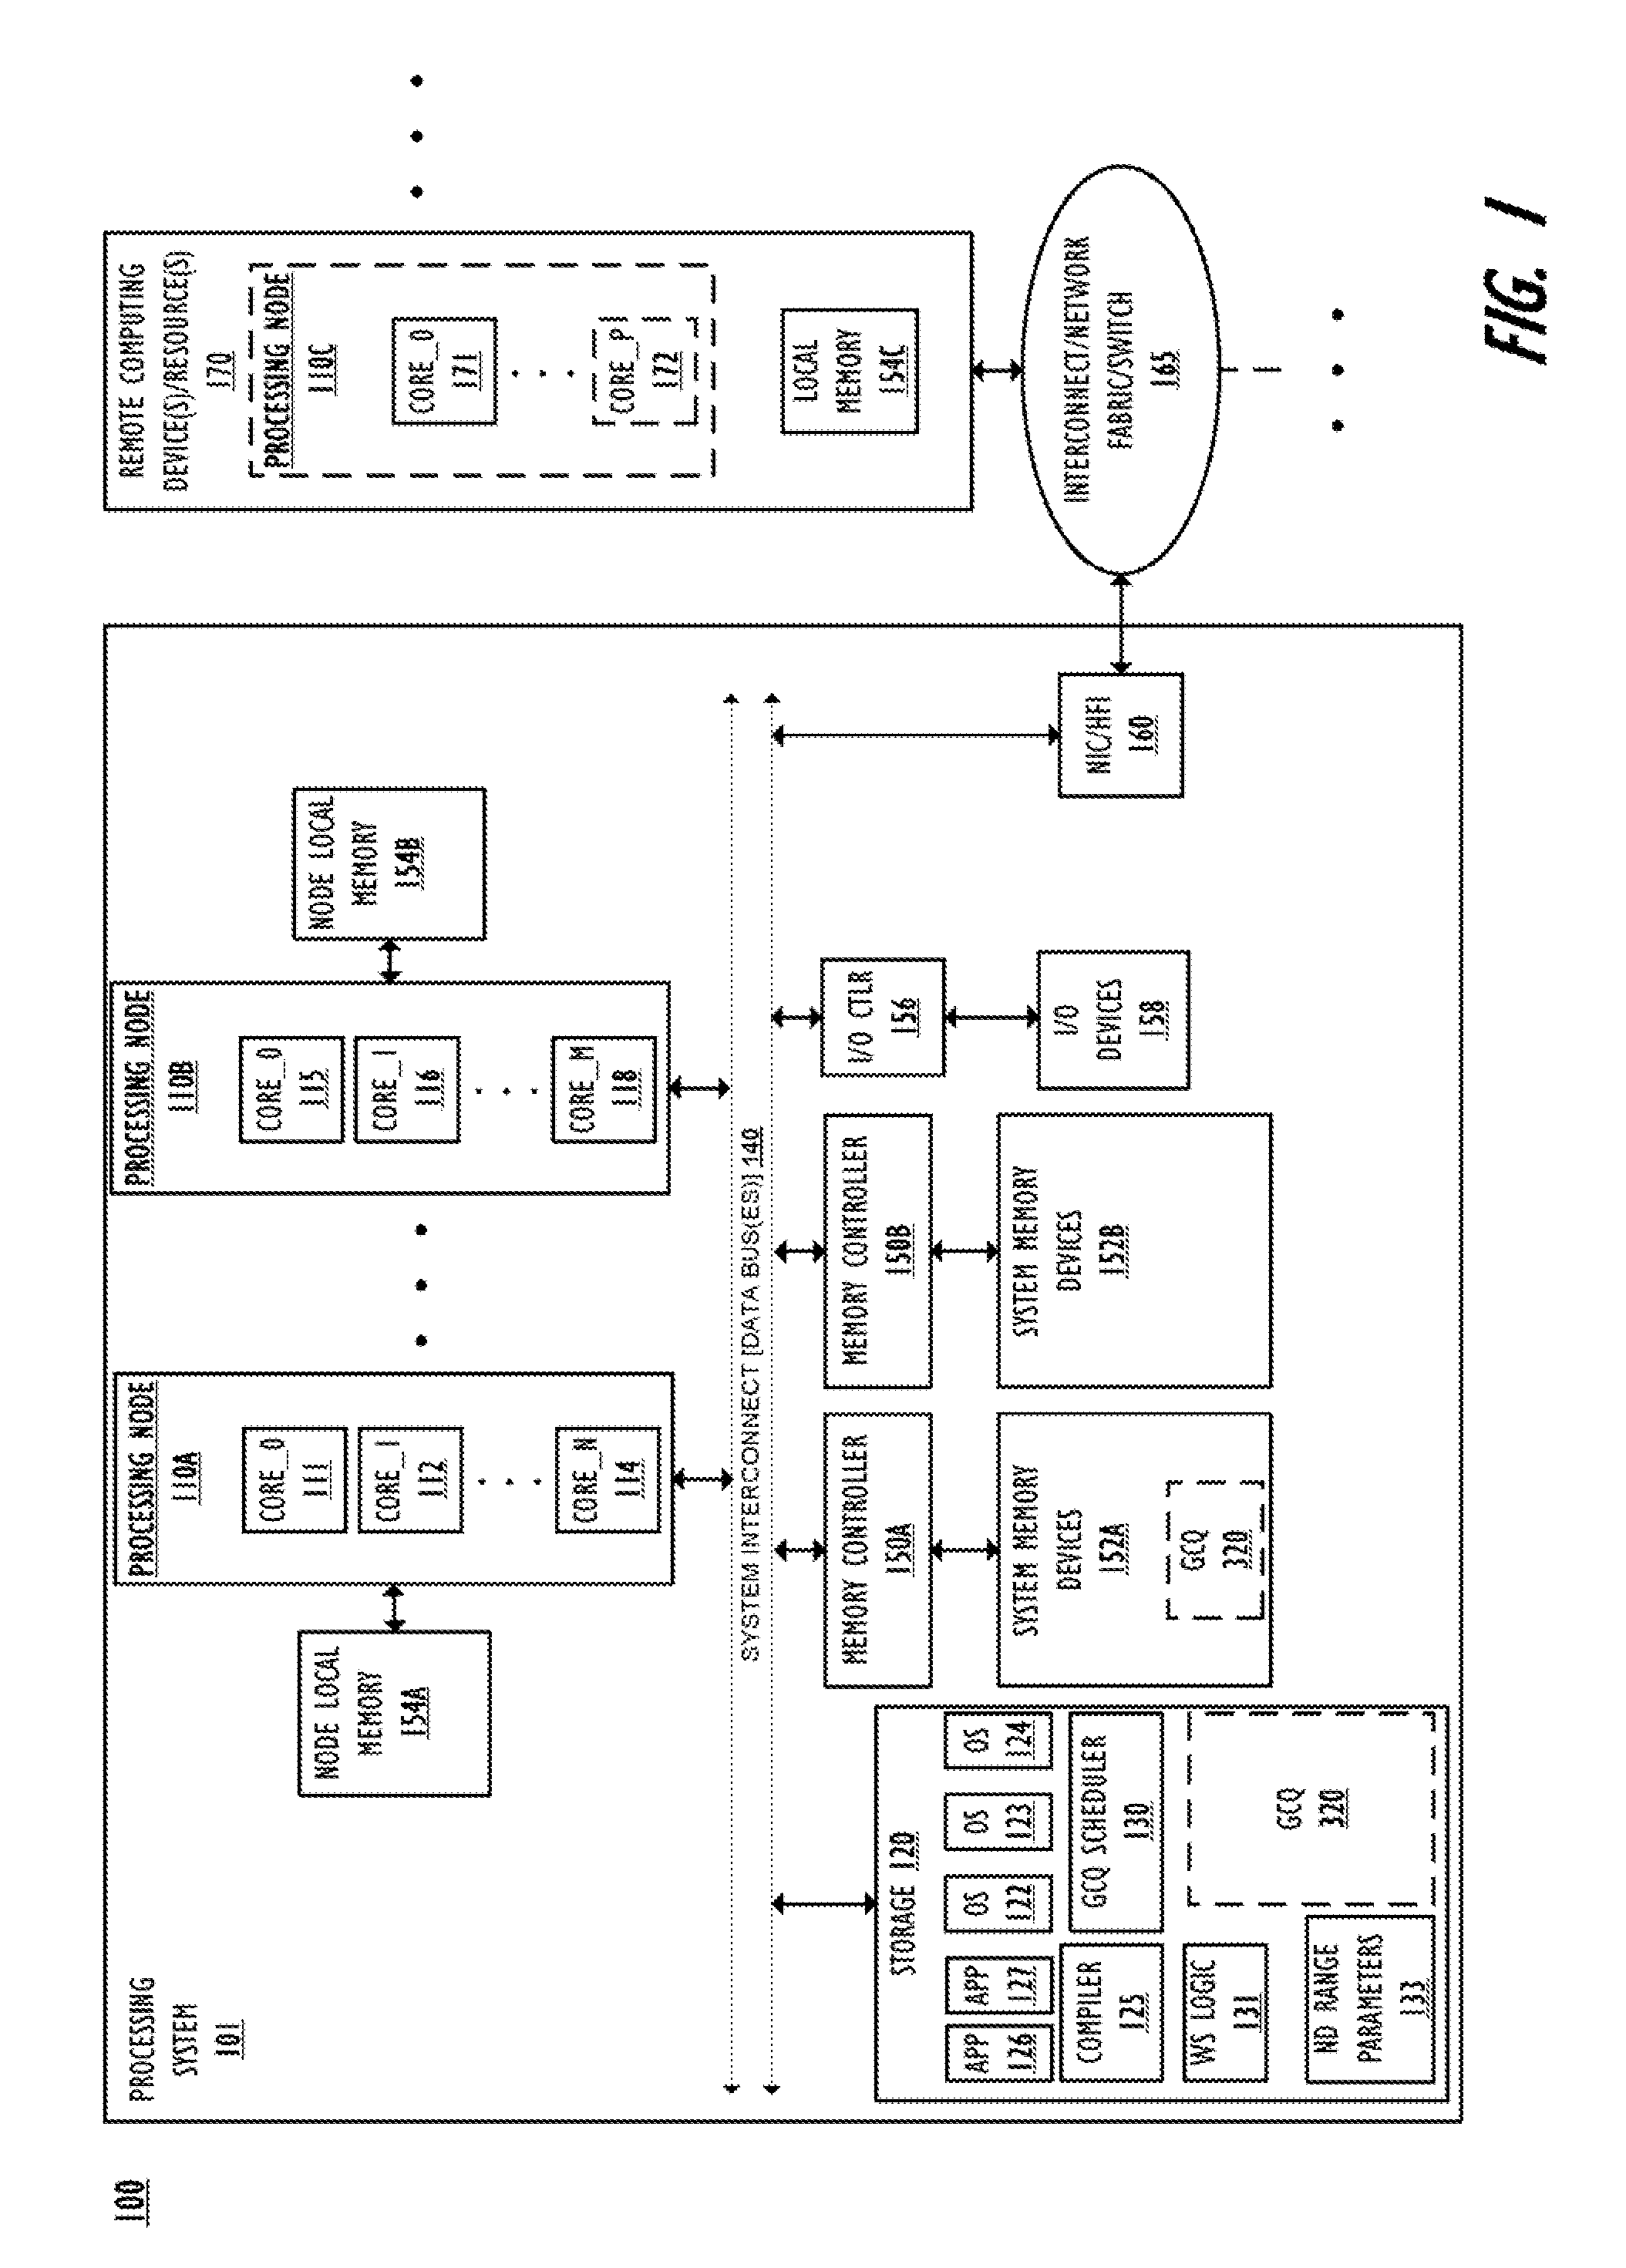 System for reducing data transfer latency to a global queue by generating bit mask to identify selected processing nodes/units in multi-node data processing system